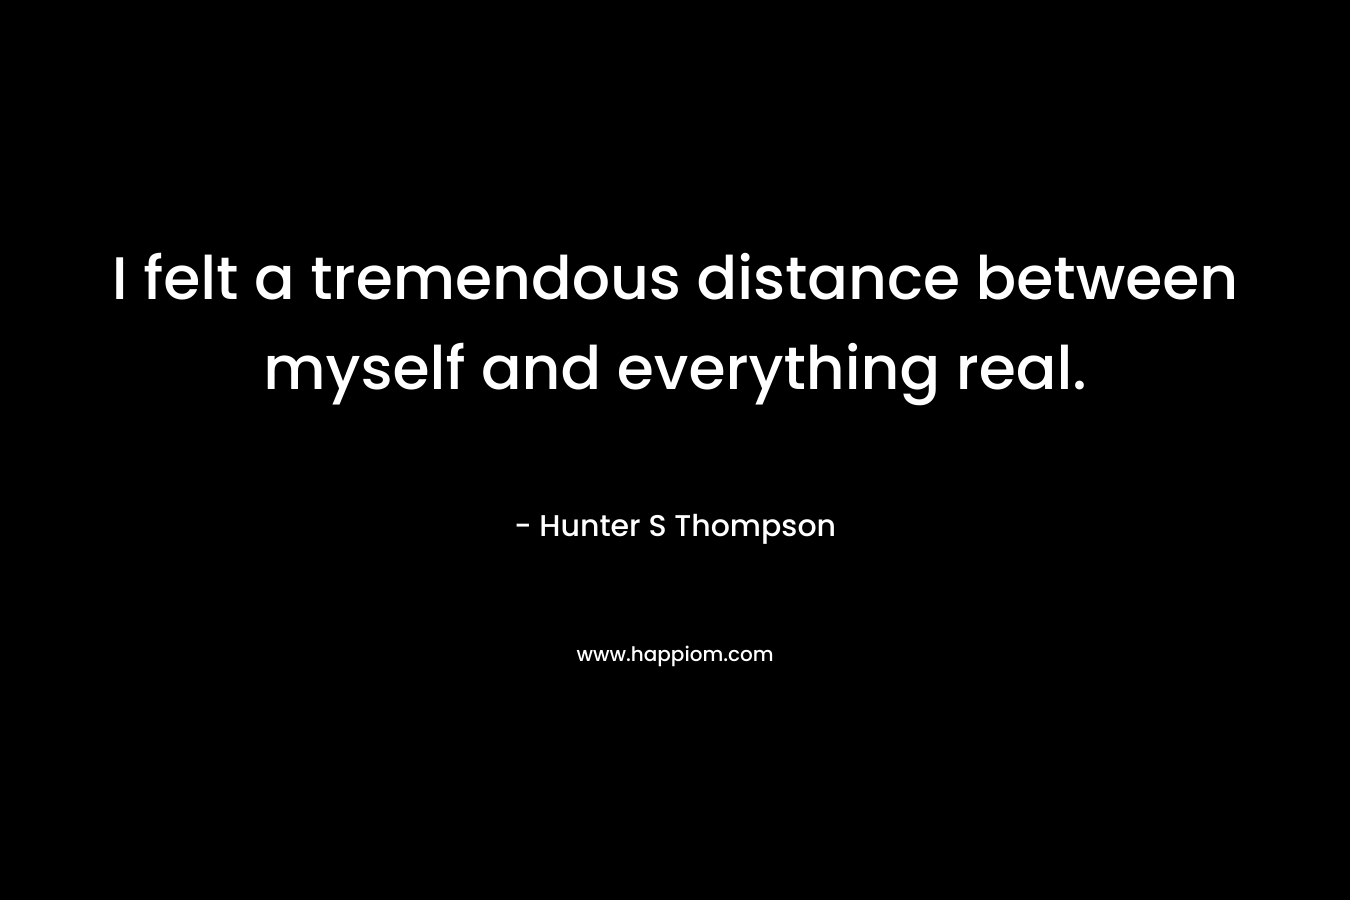 I felt a tremendous distance between myself and everything real.